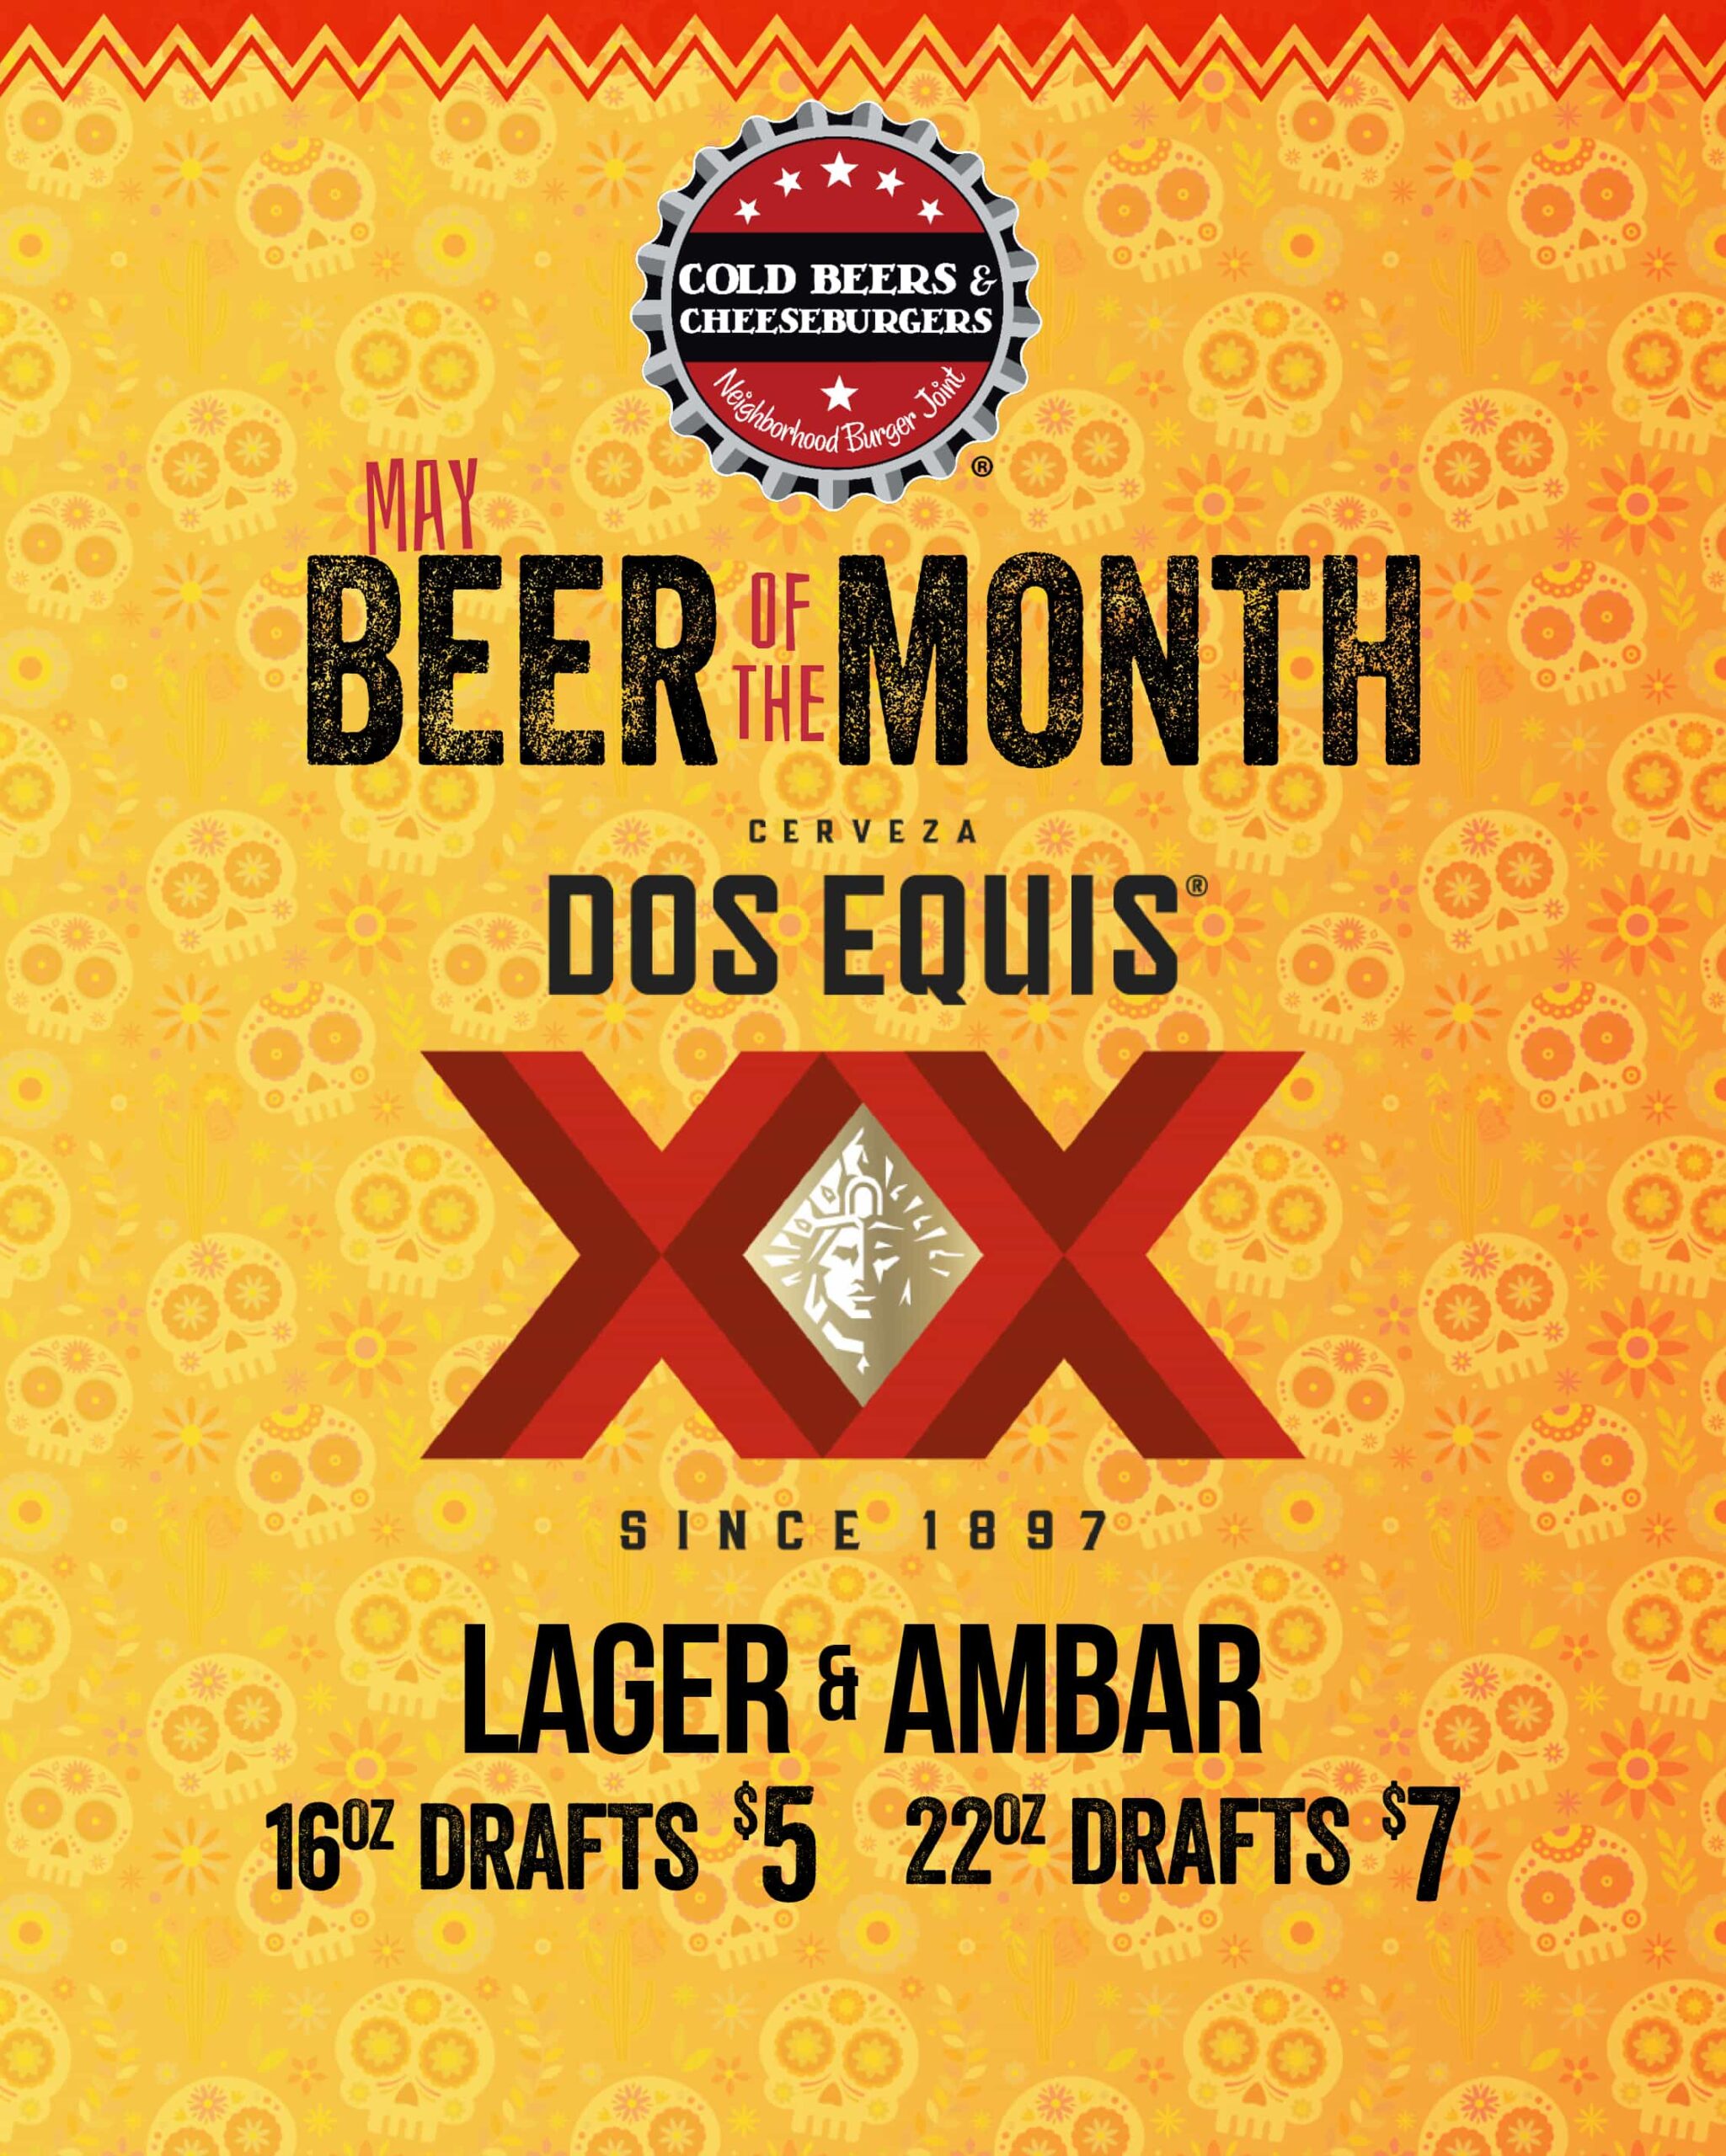 Dos Equis Beer of the Month